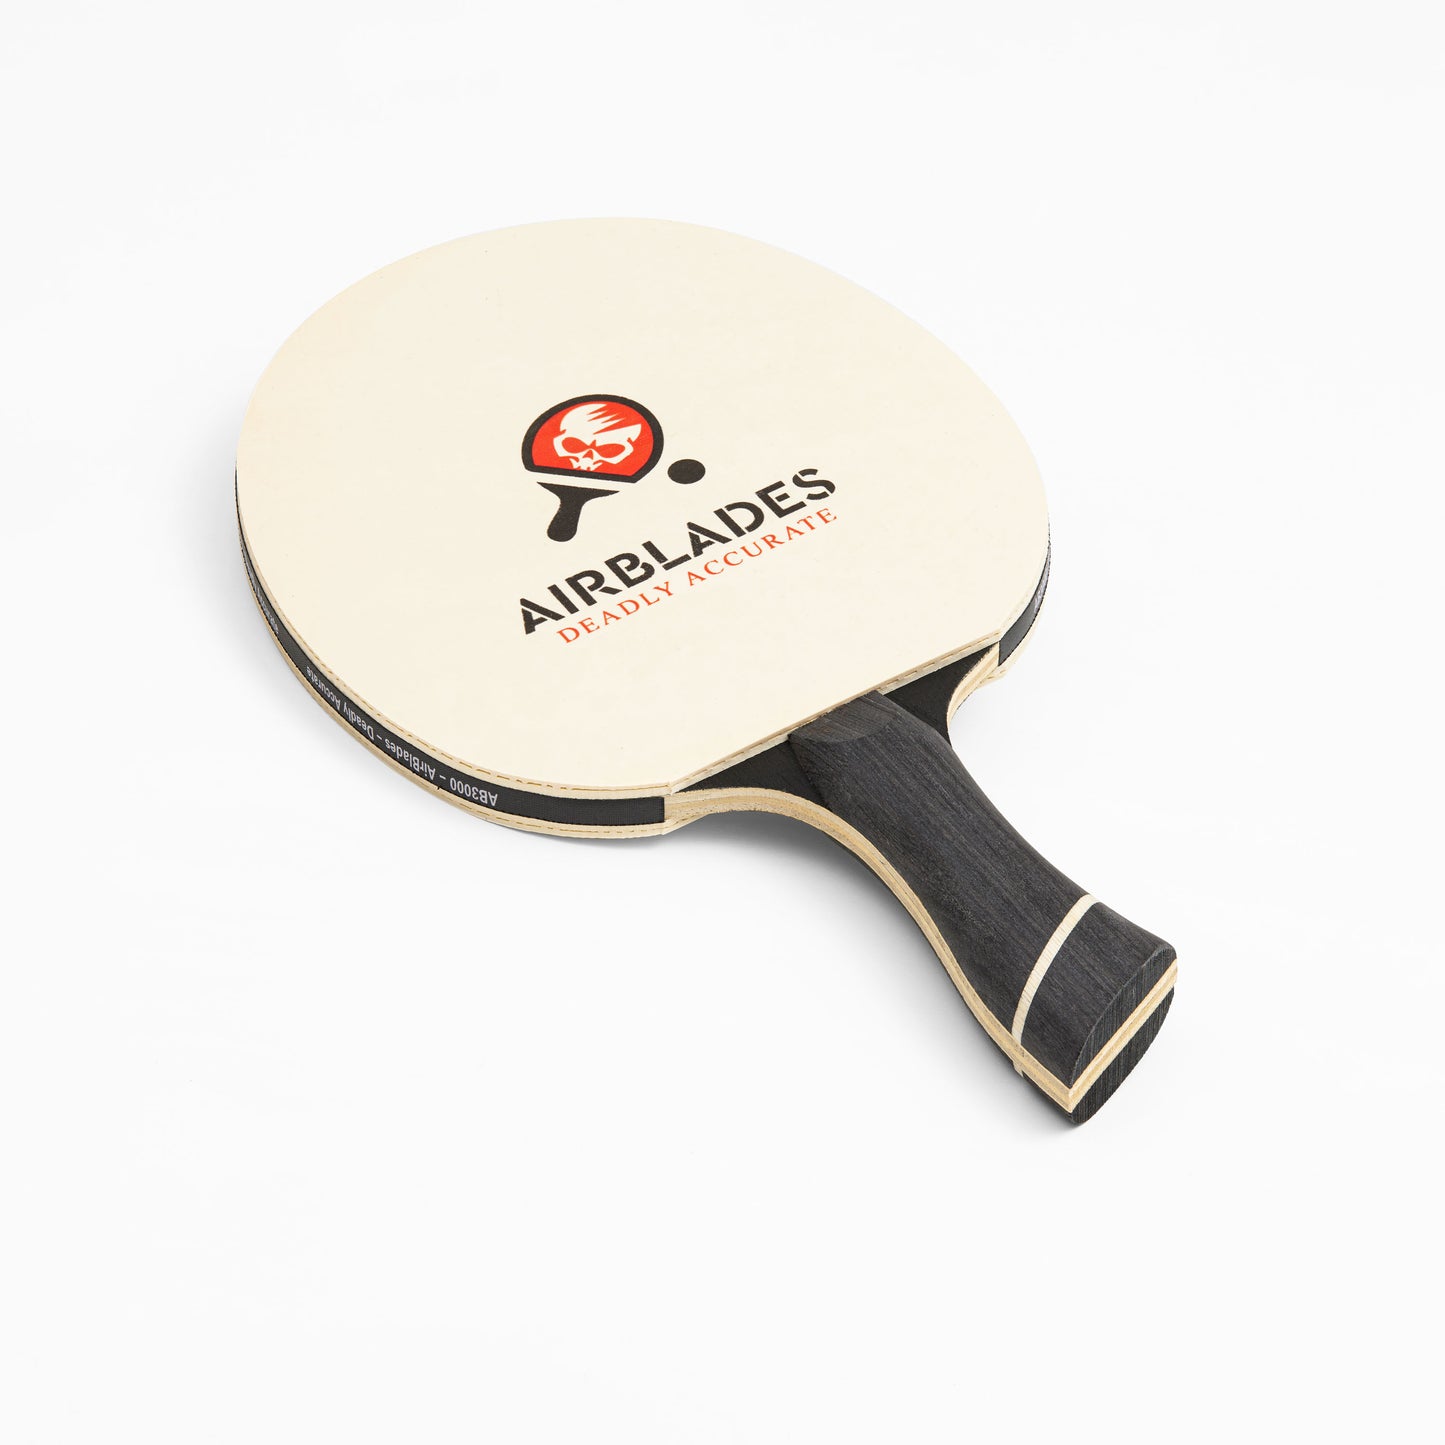 AIRBLADES Professional Ping Pong Paddles Set of 2 + Two Spare Rubbers | Pro Table Tennis Racket with Hard Cary Case | Ergonomic Handle | 5 Blades of Wood with Premium Rubber and Sponge